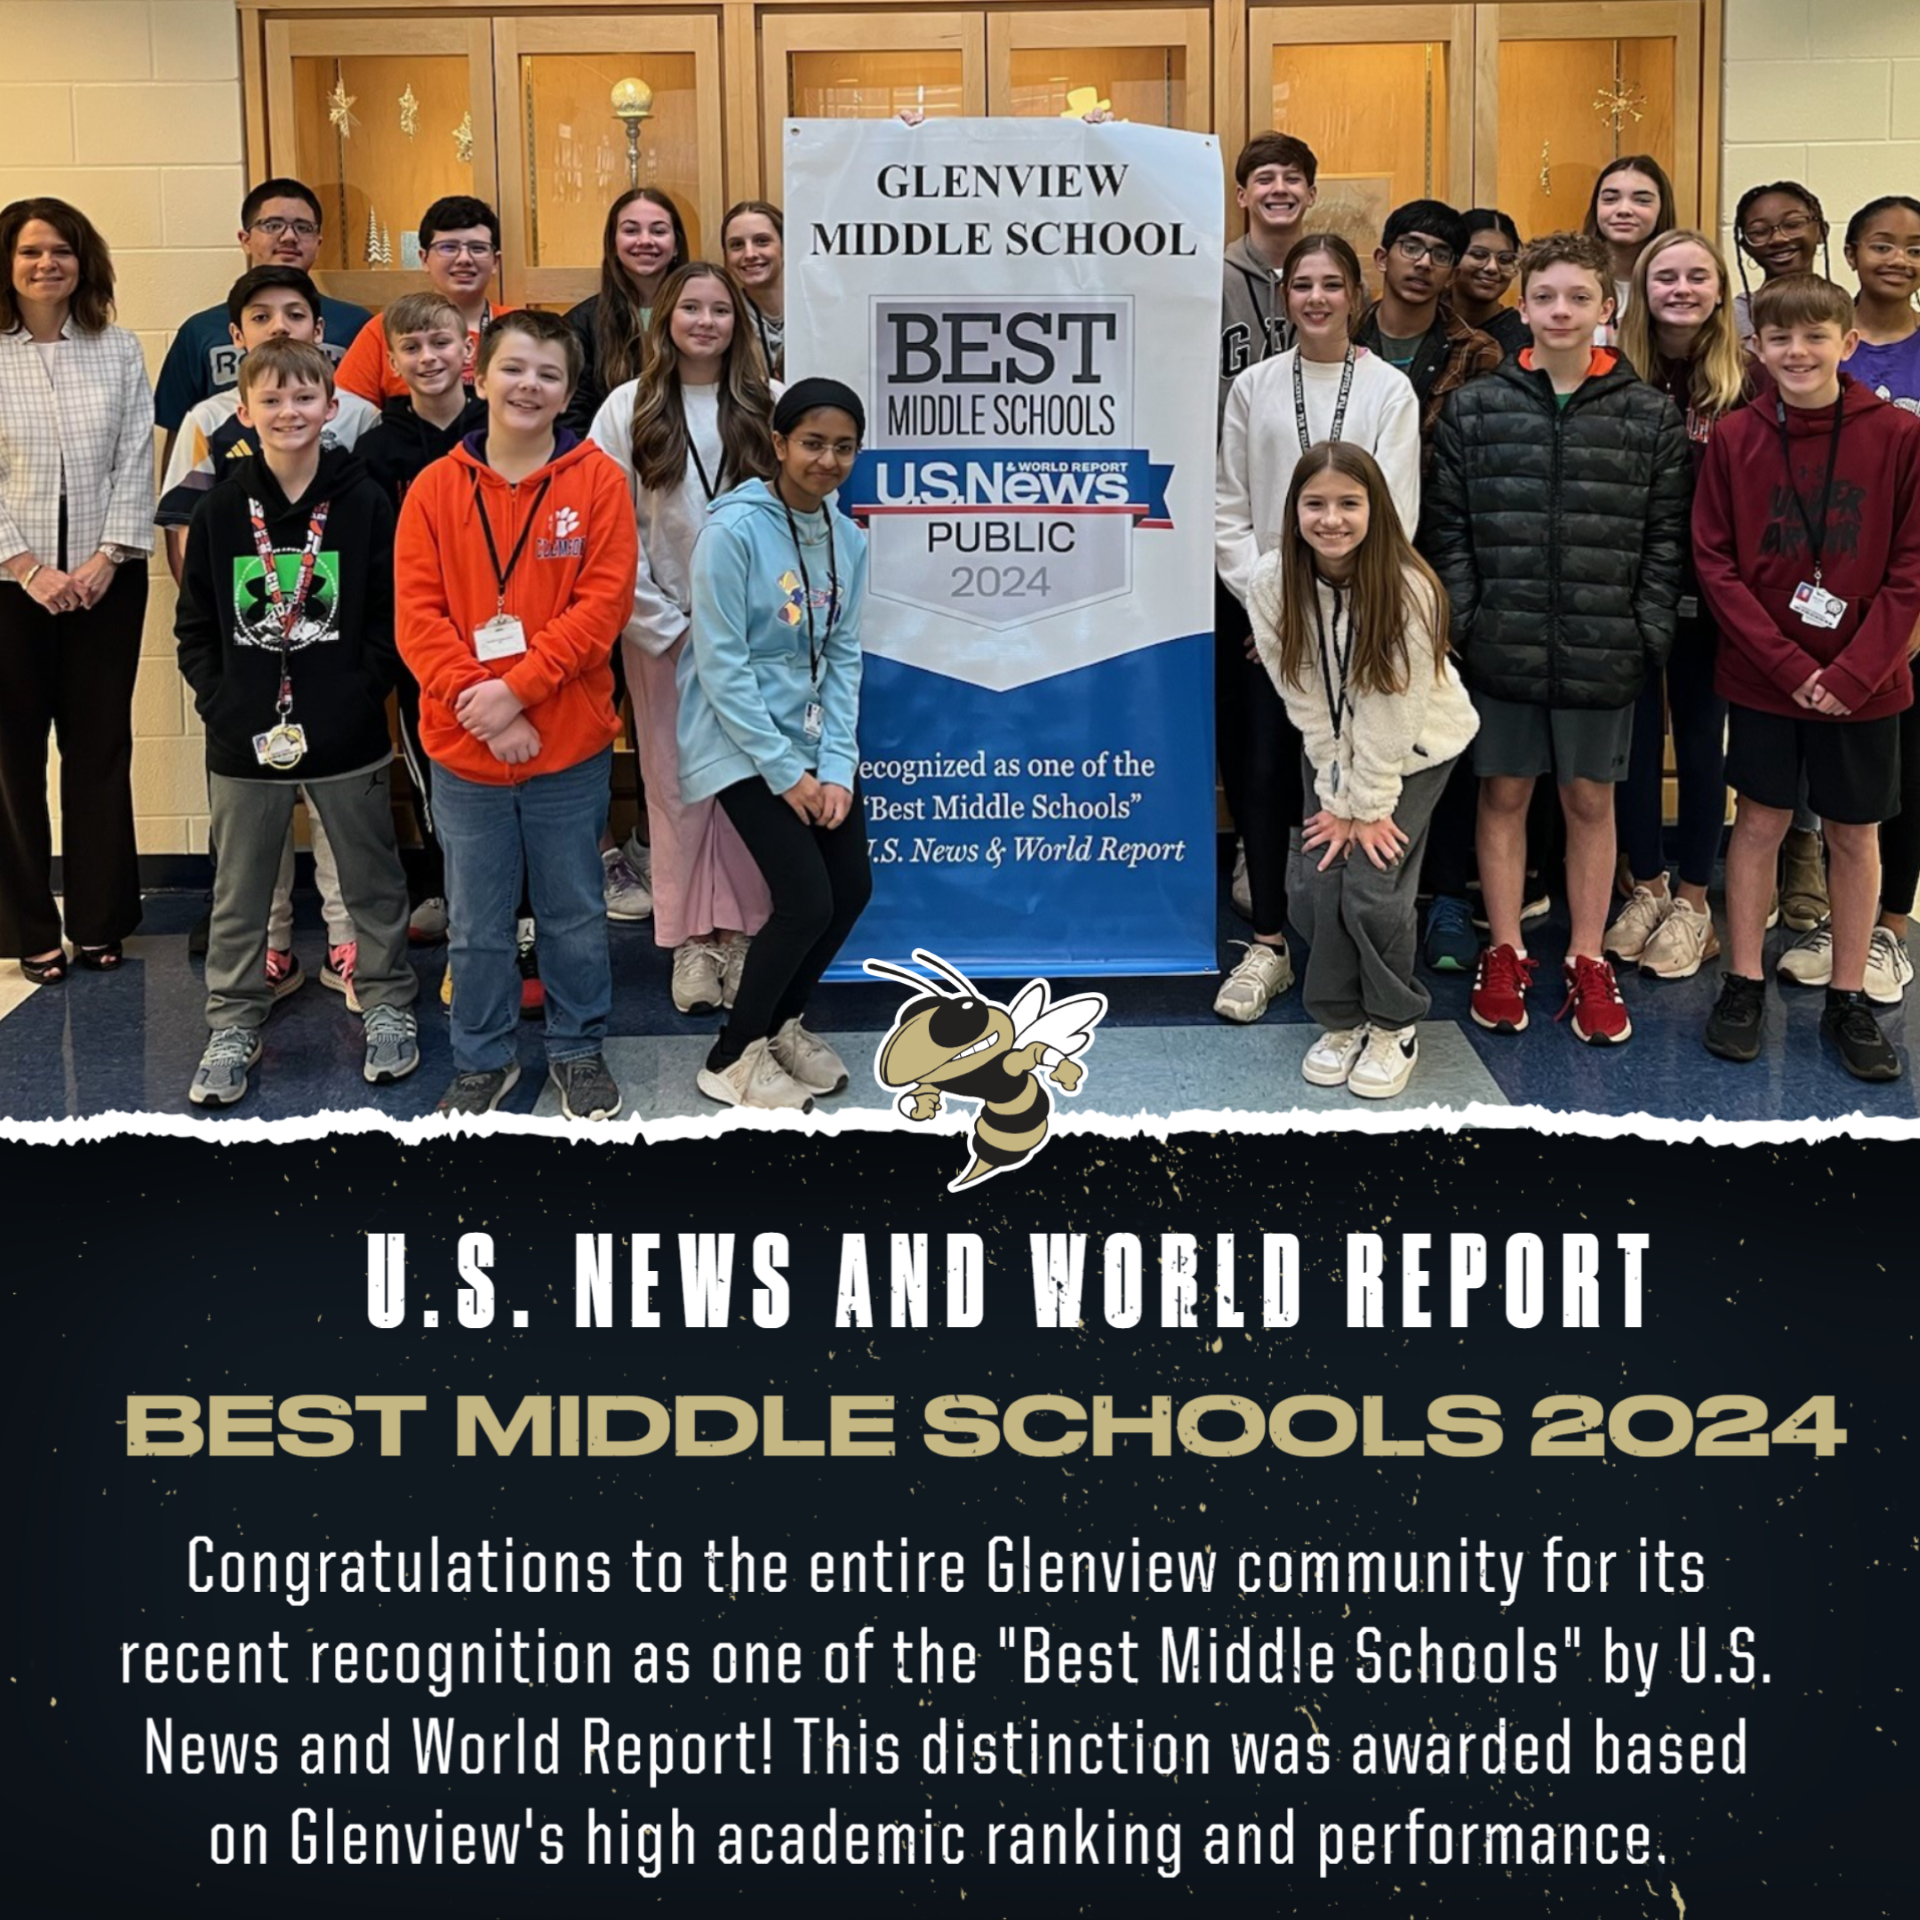 U.S. News and World Report: Best Middle Schools 2024